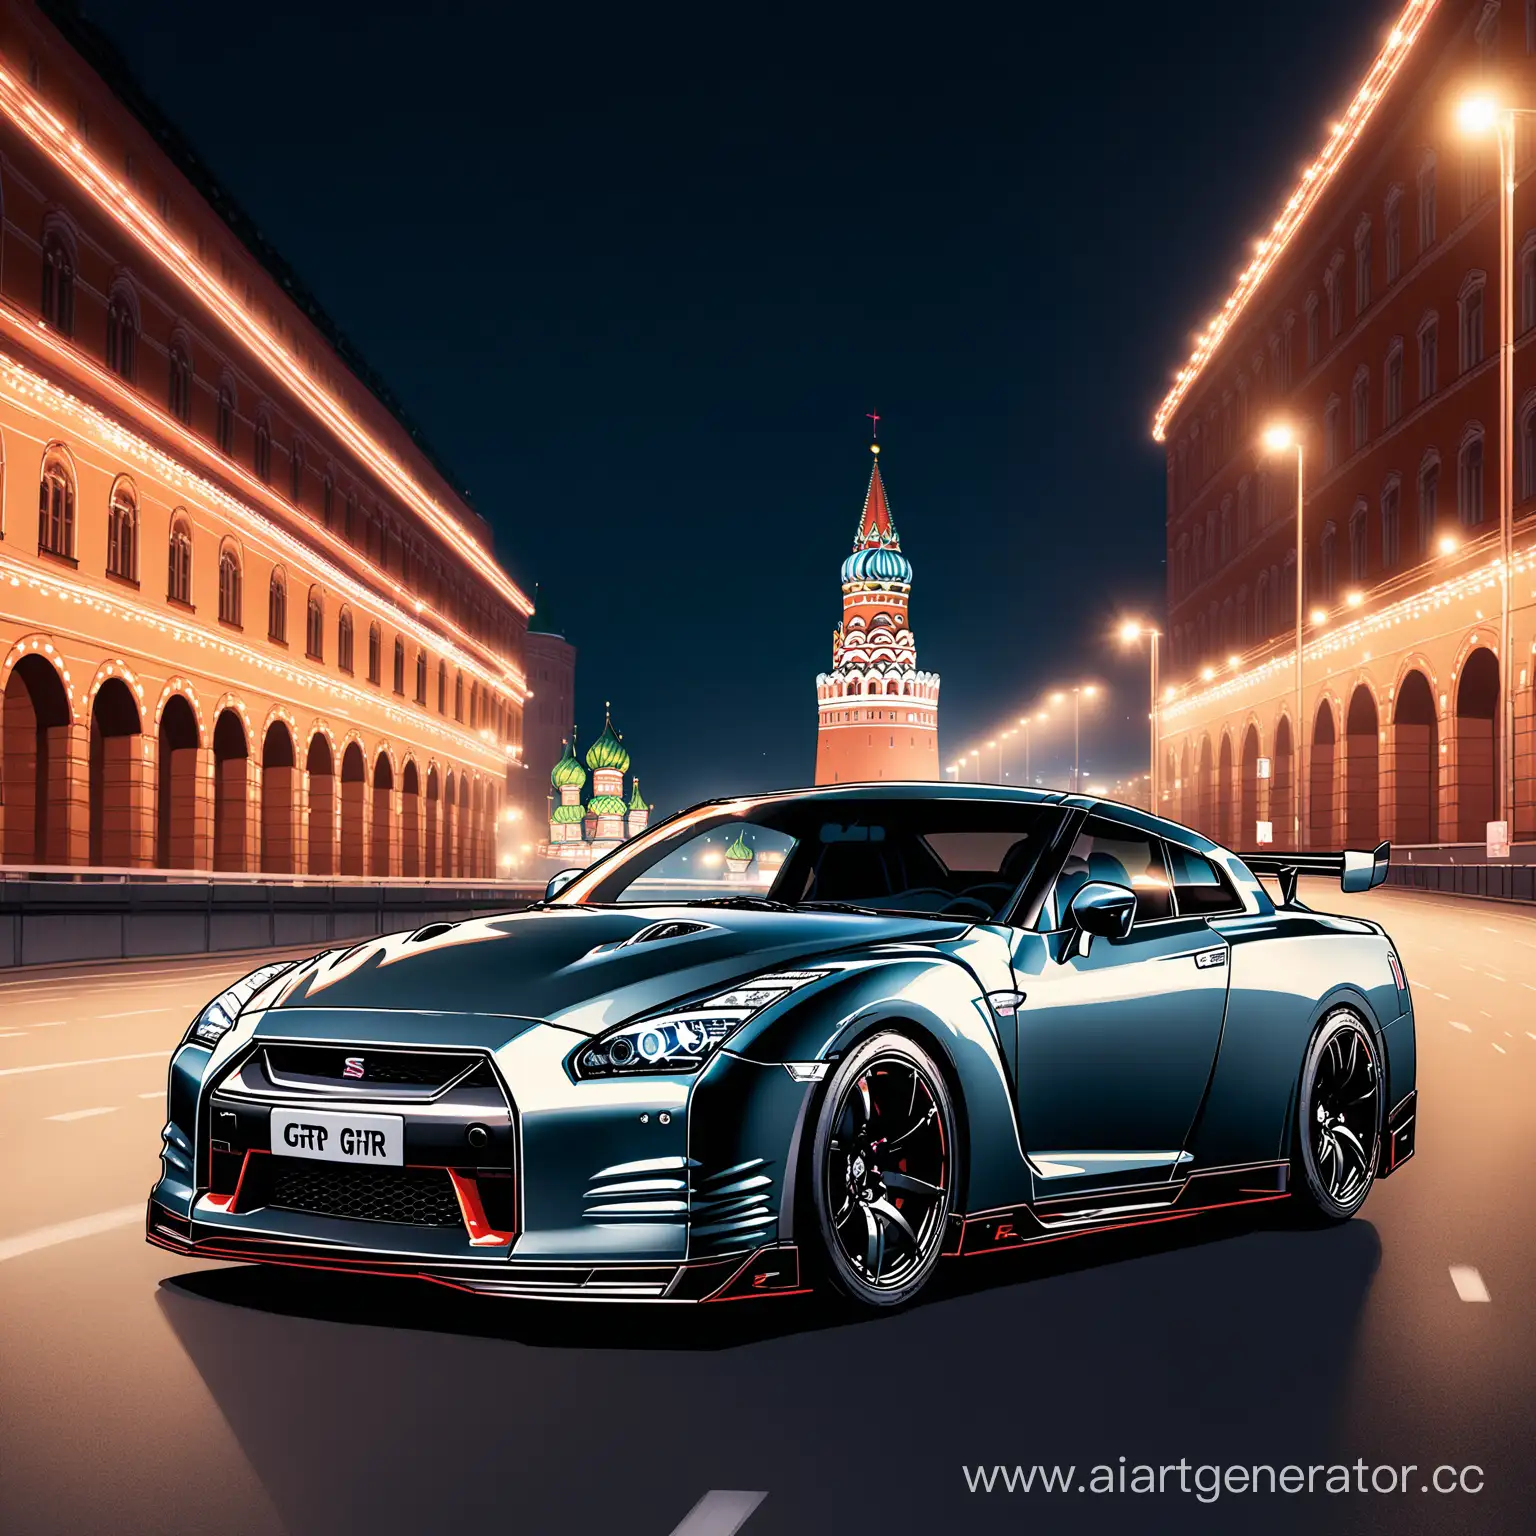 Stunning-Nissan-GTR-Roaming-the-Illuminated-Streets-of-Moscow-at-Night